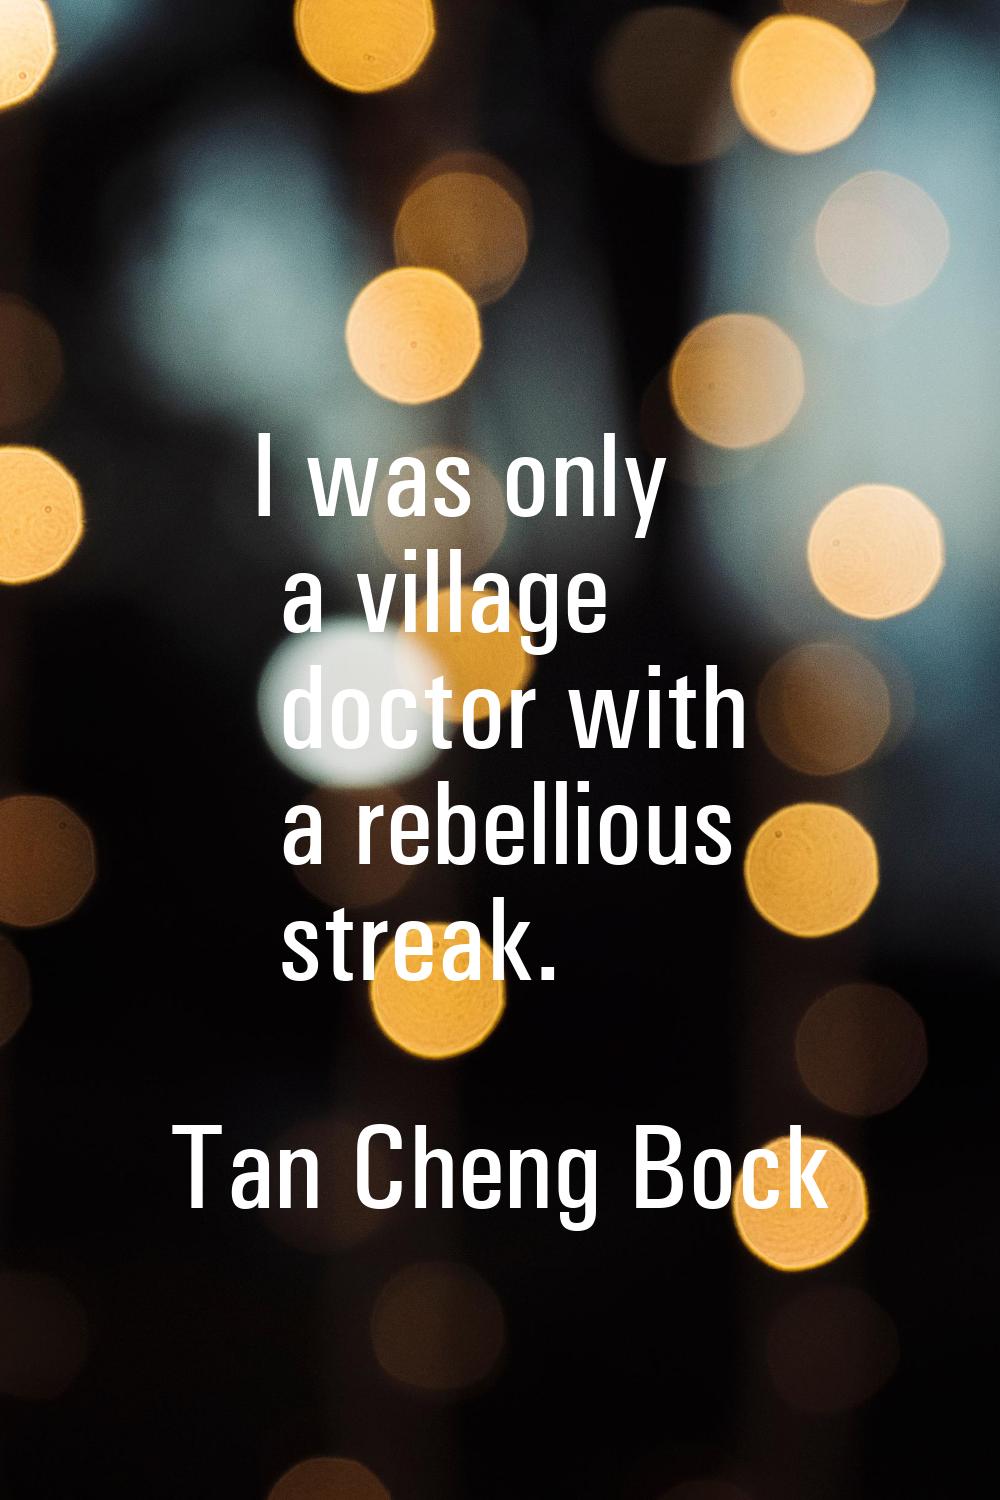 I was only a village doctor with a rebellious streak.